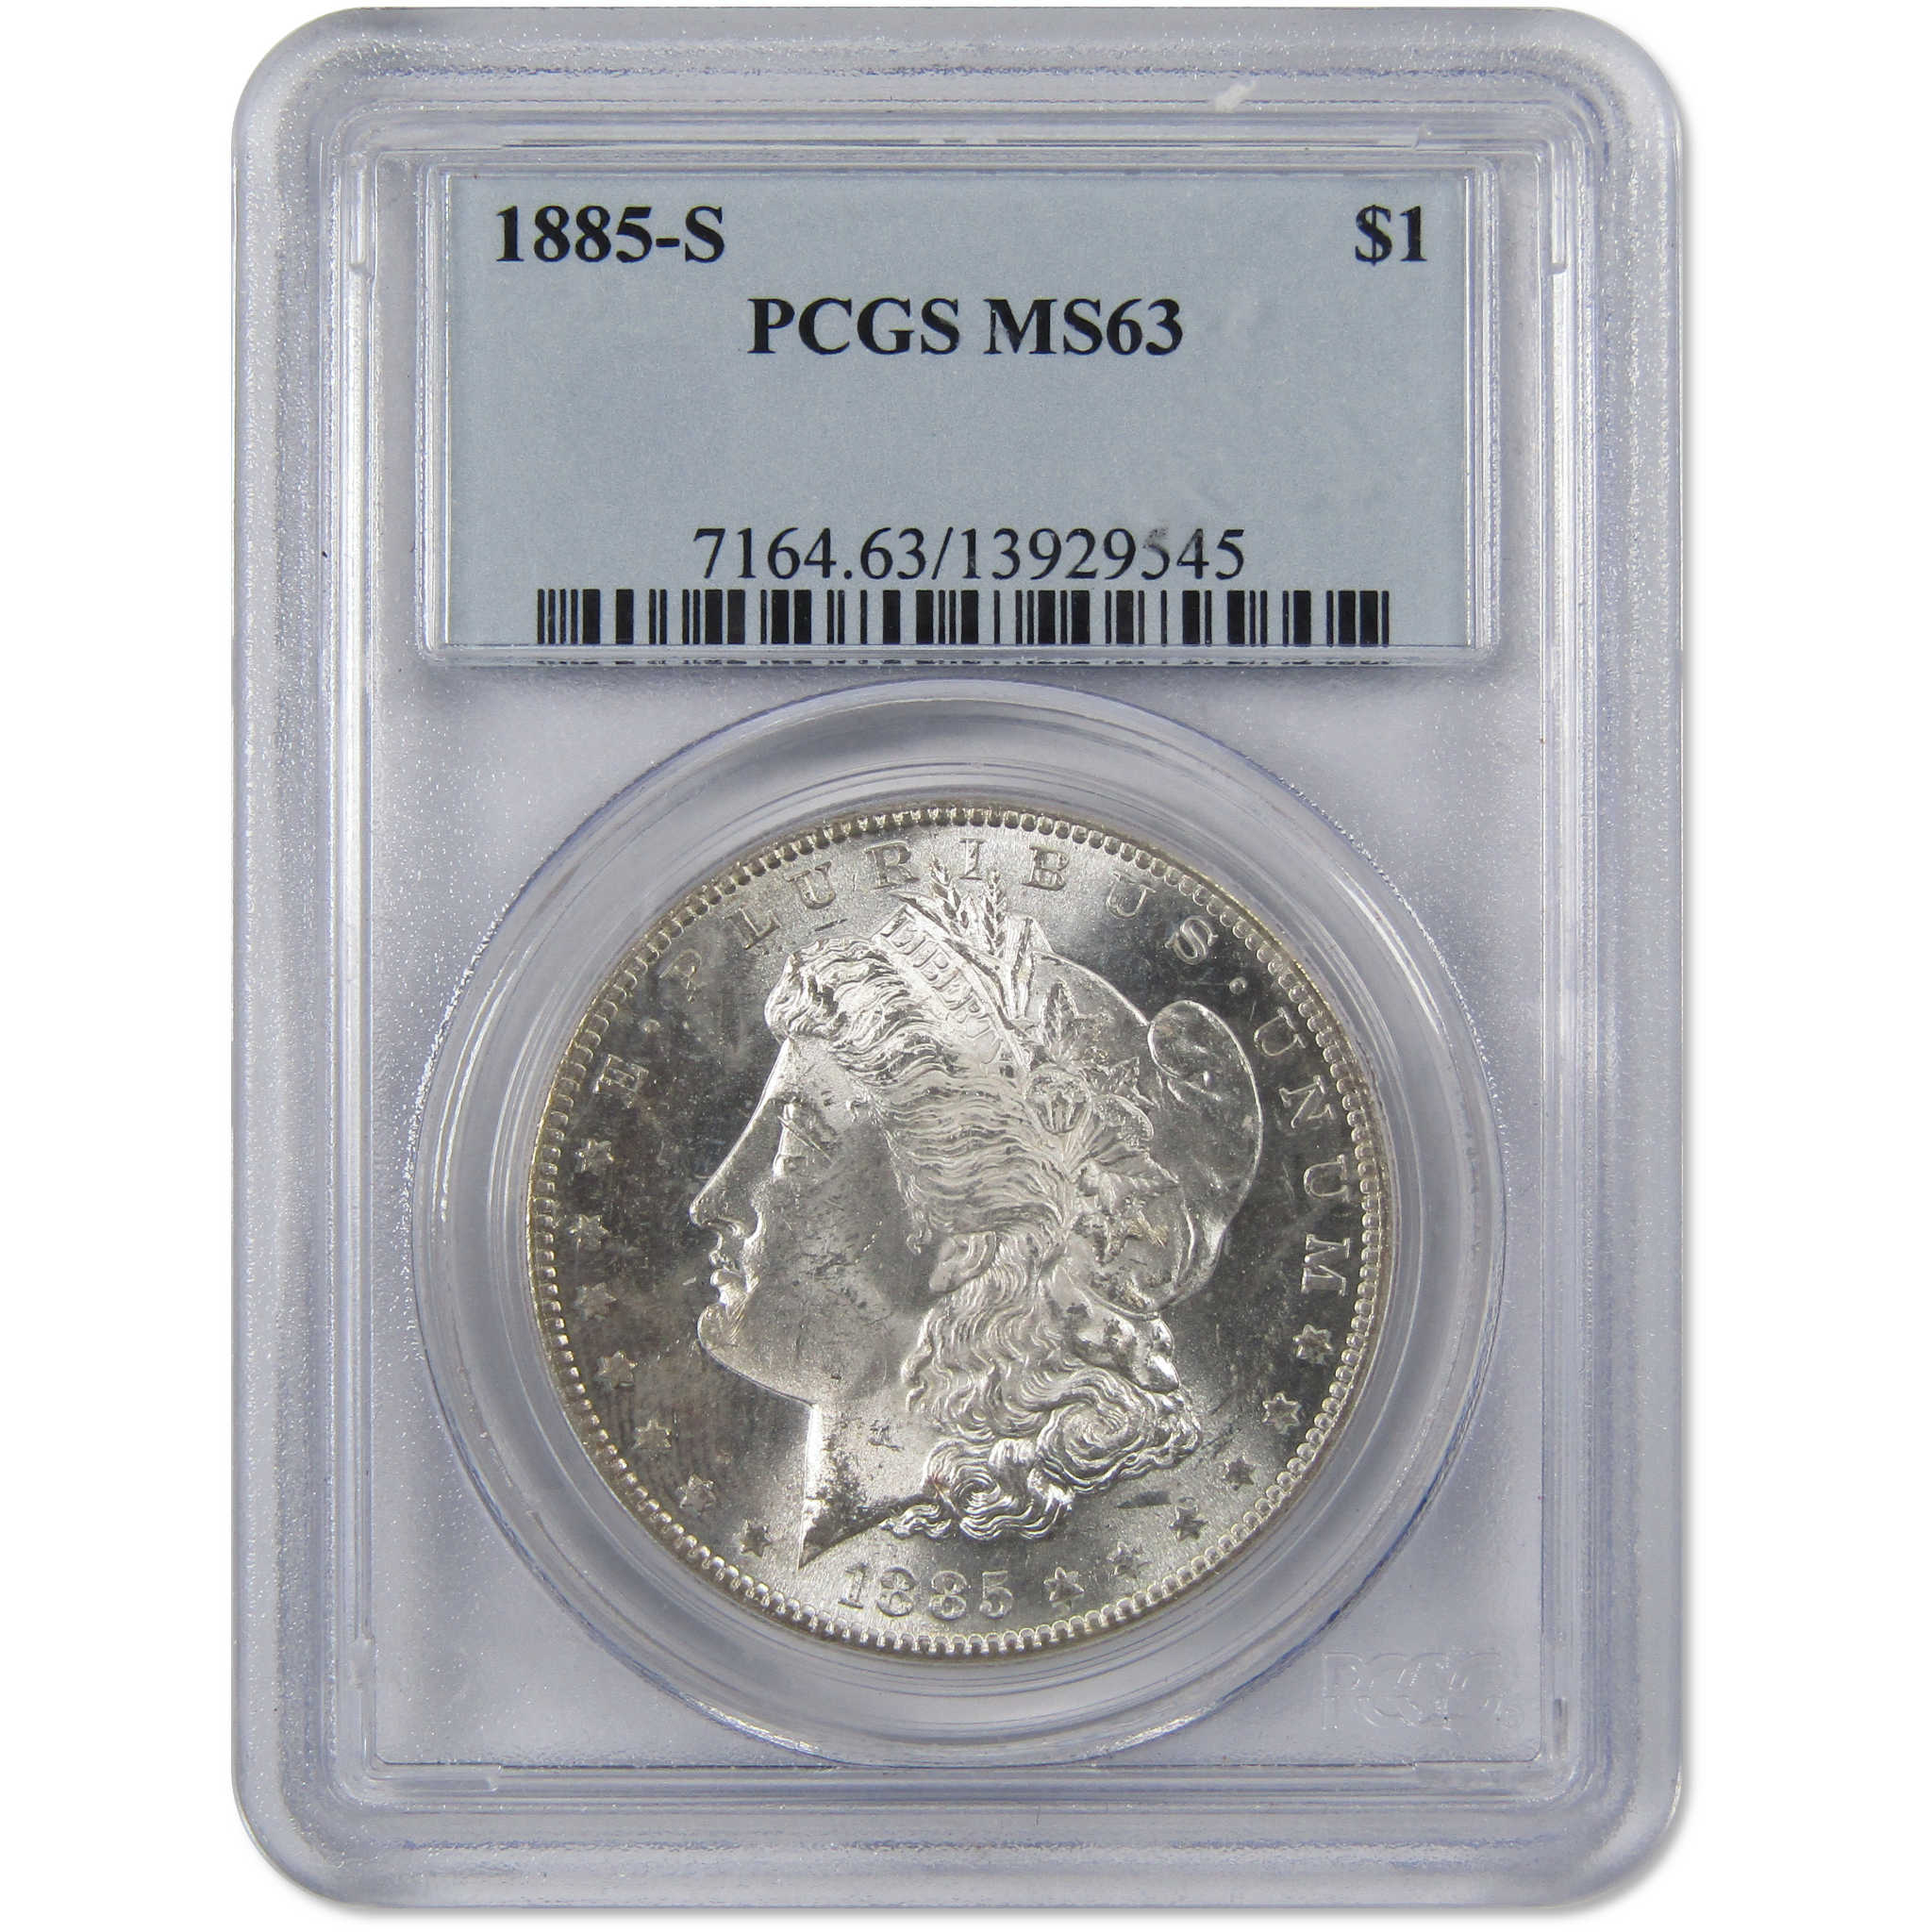 1885 S Morgan Dollar MS 63 PCGS 90% Silver $1 Coin SKU:I9735 - Morgan coin - Morgan silver dollar - Morgan silver dollar for sale - Profile Coins &amp; Collectibles